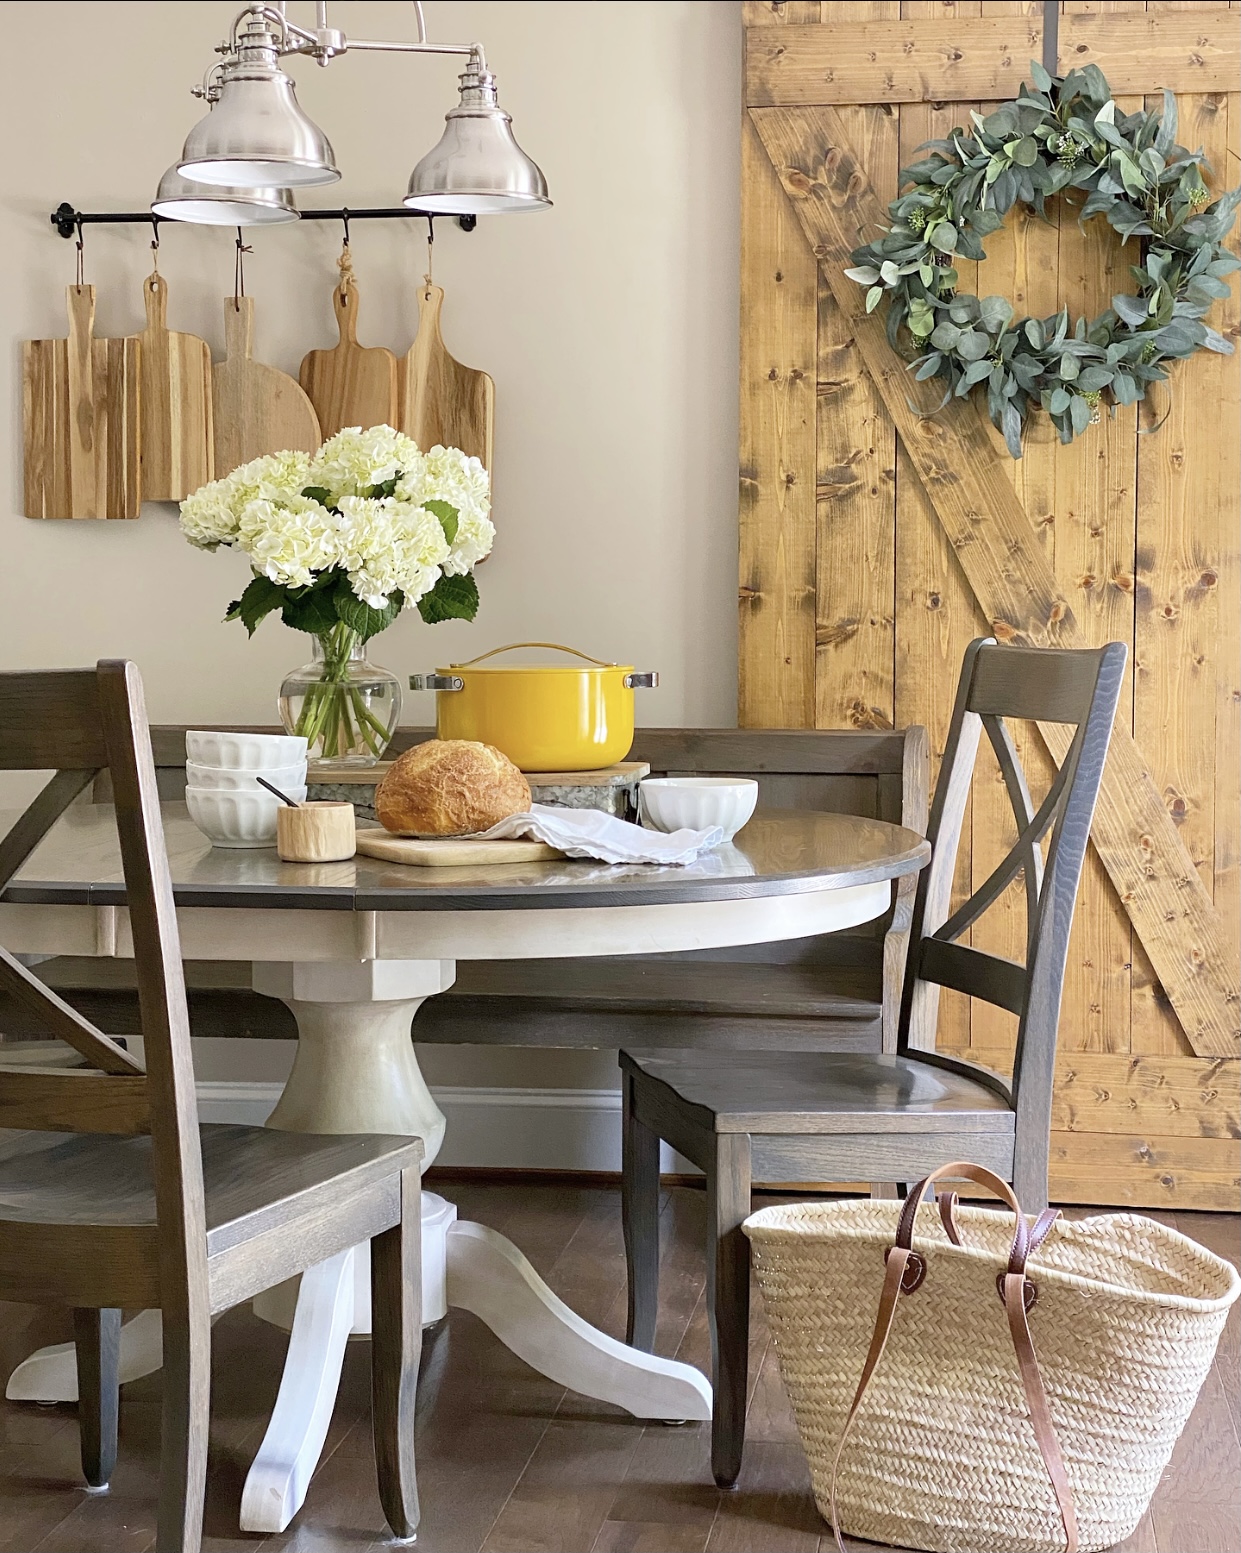 Breakfast nook with a centerpiece on the table including white flowers in a vase, a yellow Dutch oven, and fresh baked bread with soup bowls.